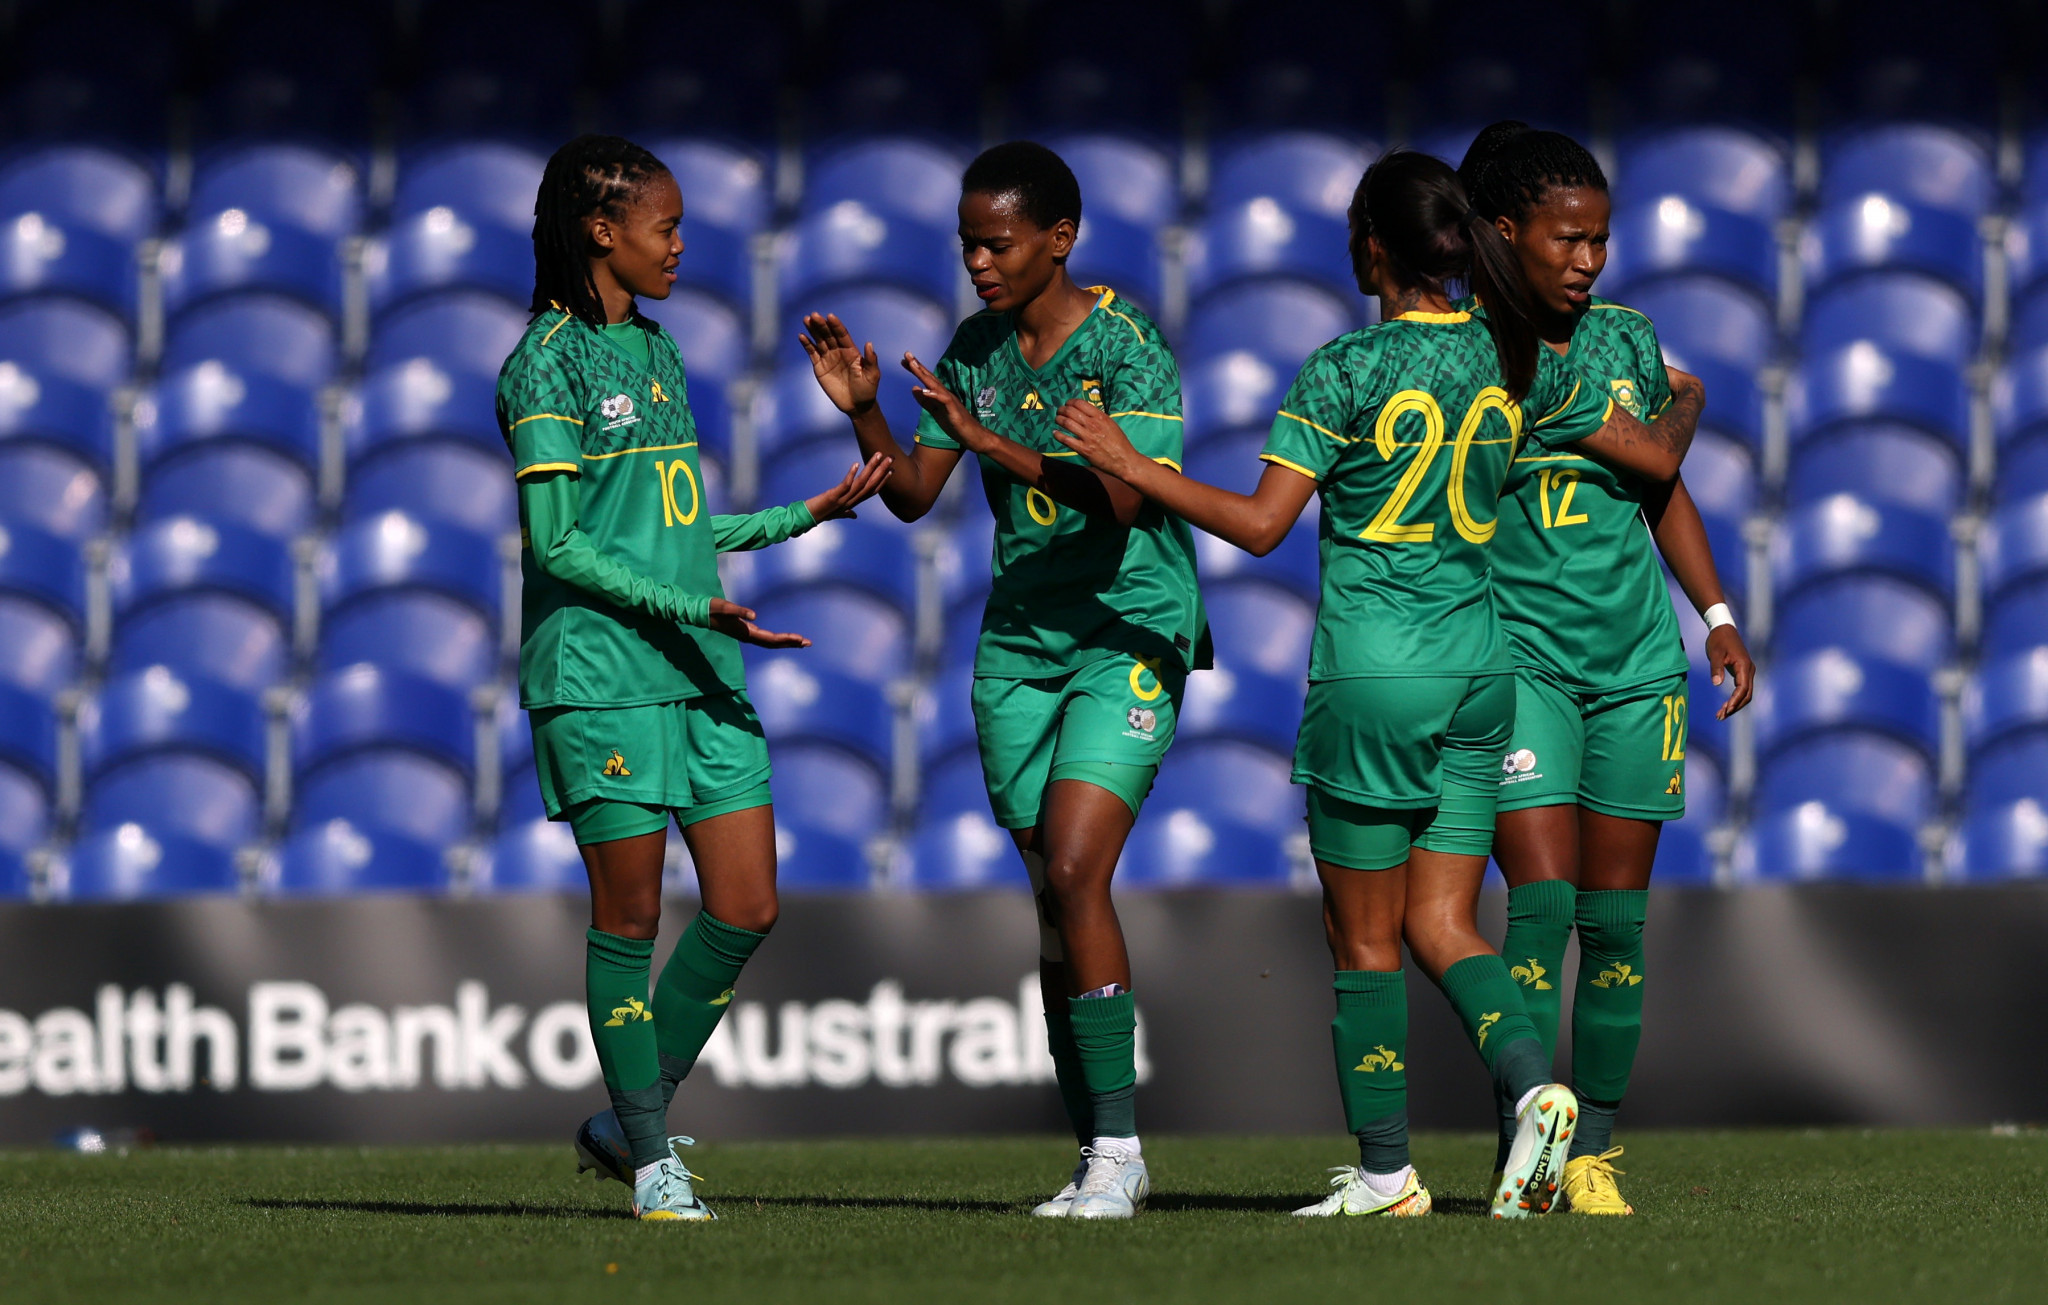 South Africa's bid for the 2027 FIFA Women's World Cup has received Government support ©Getty Images